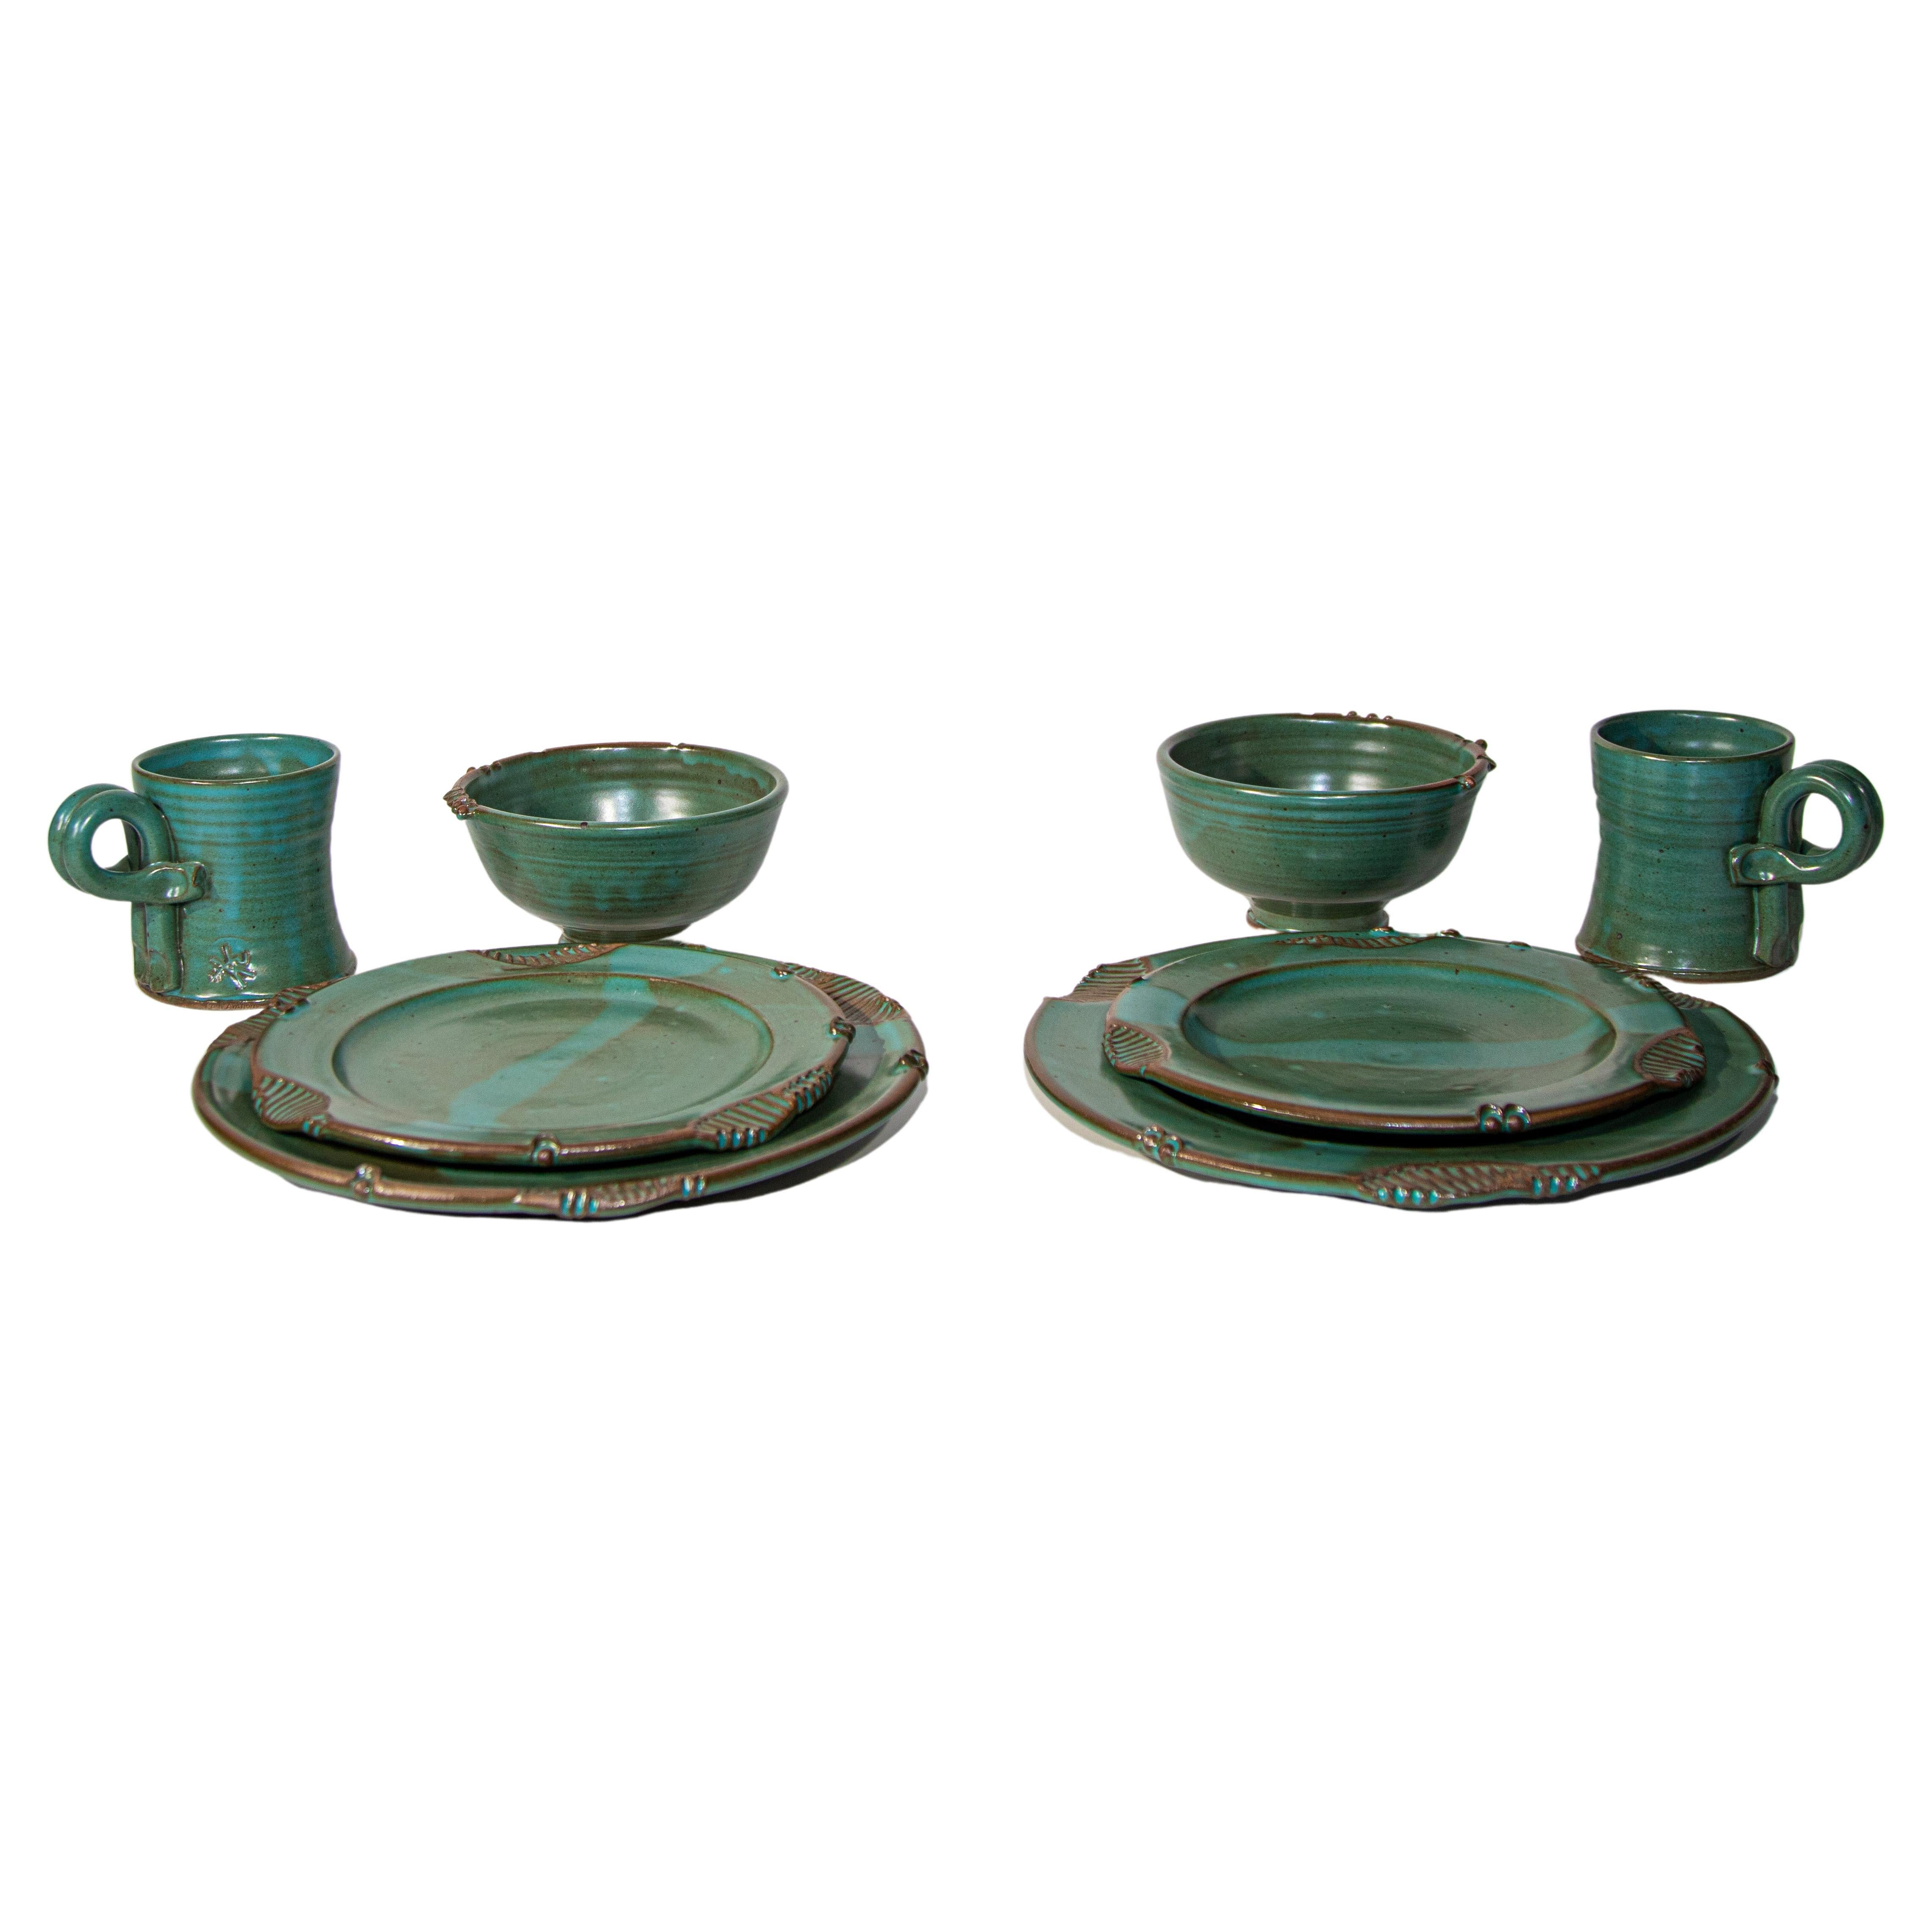 Paul Anthony Vintage Teal Green Stoneware Service Set of 8 For Sale